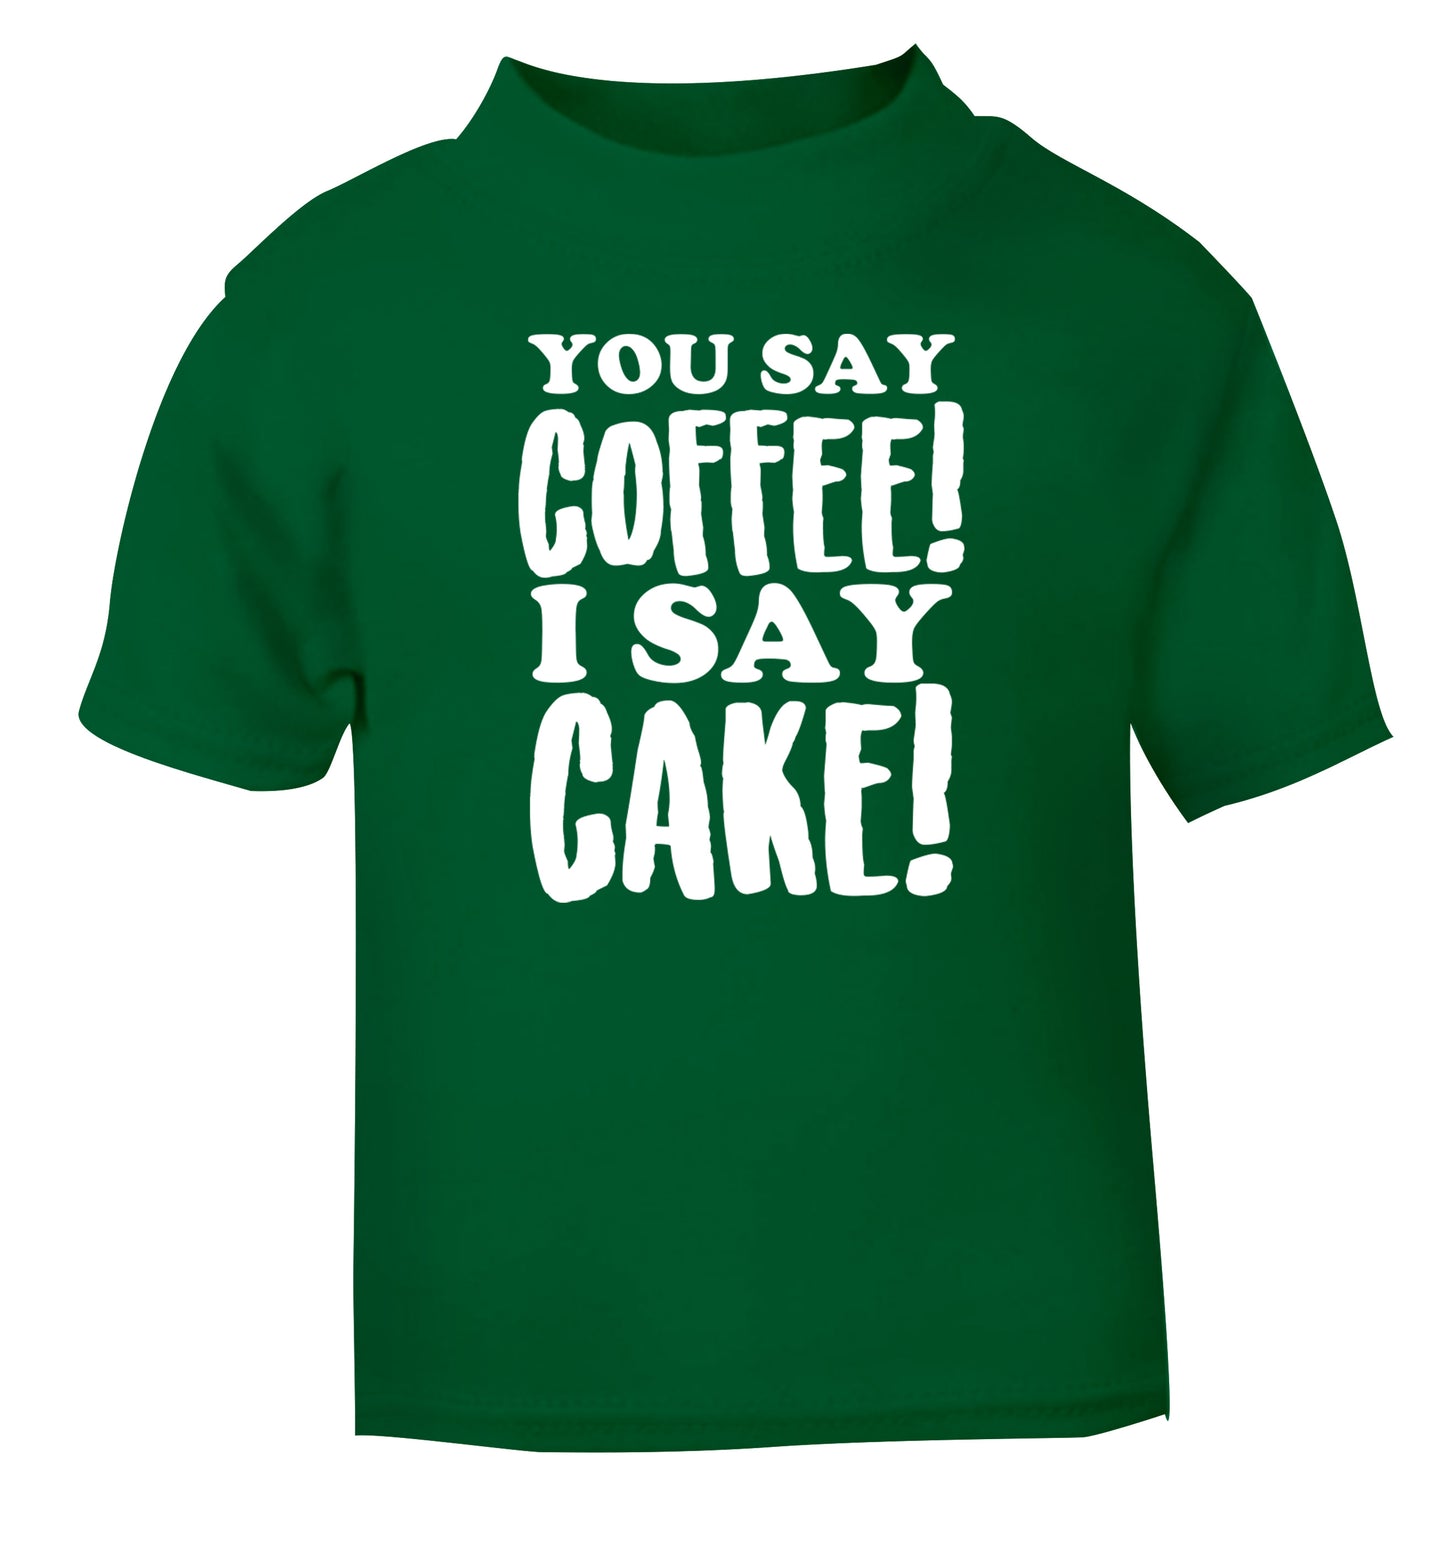 You say coffee I say cake! green Baby Toddler Tshirt 2 Years